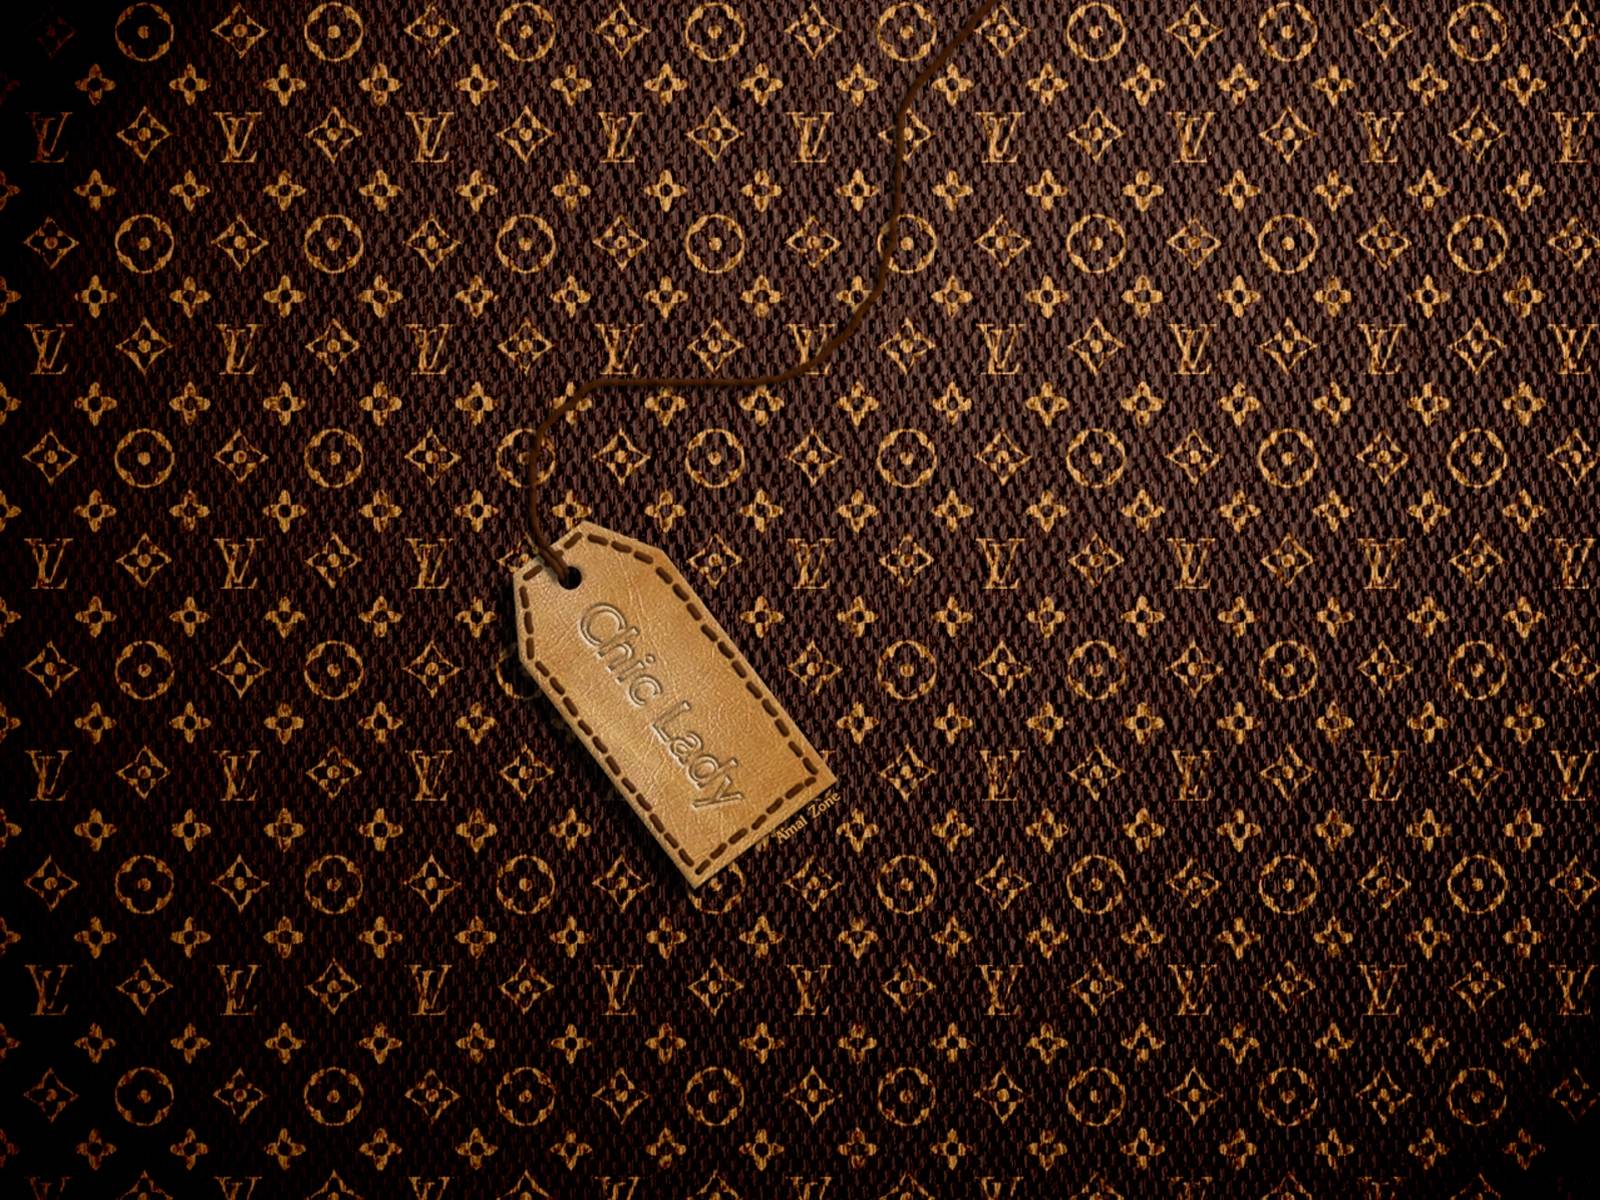 Top 25 Best Louis Vuitton iPhone Wallpapers [ 4k & HD Quality ]